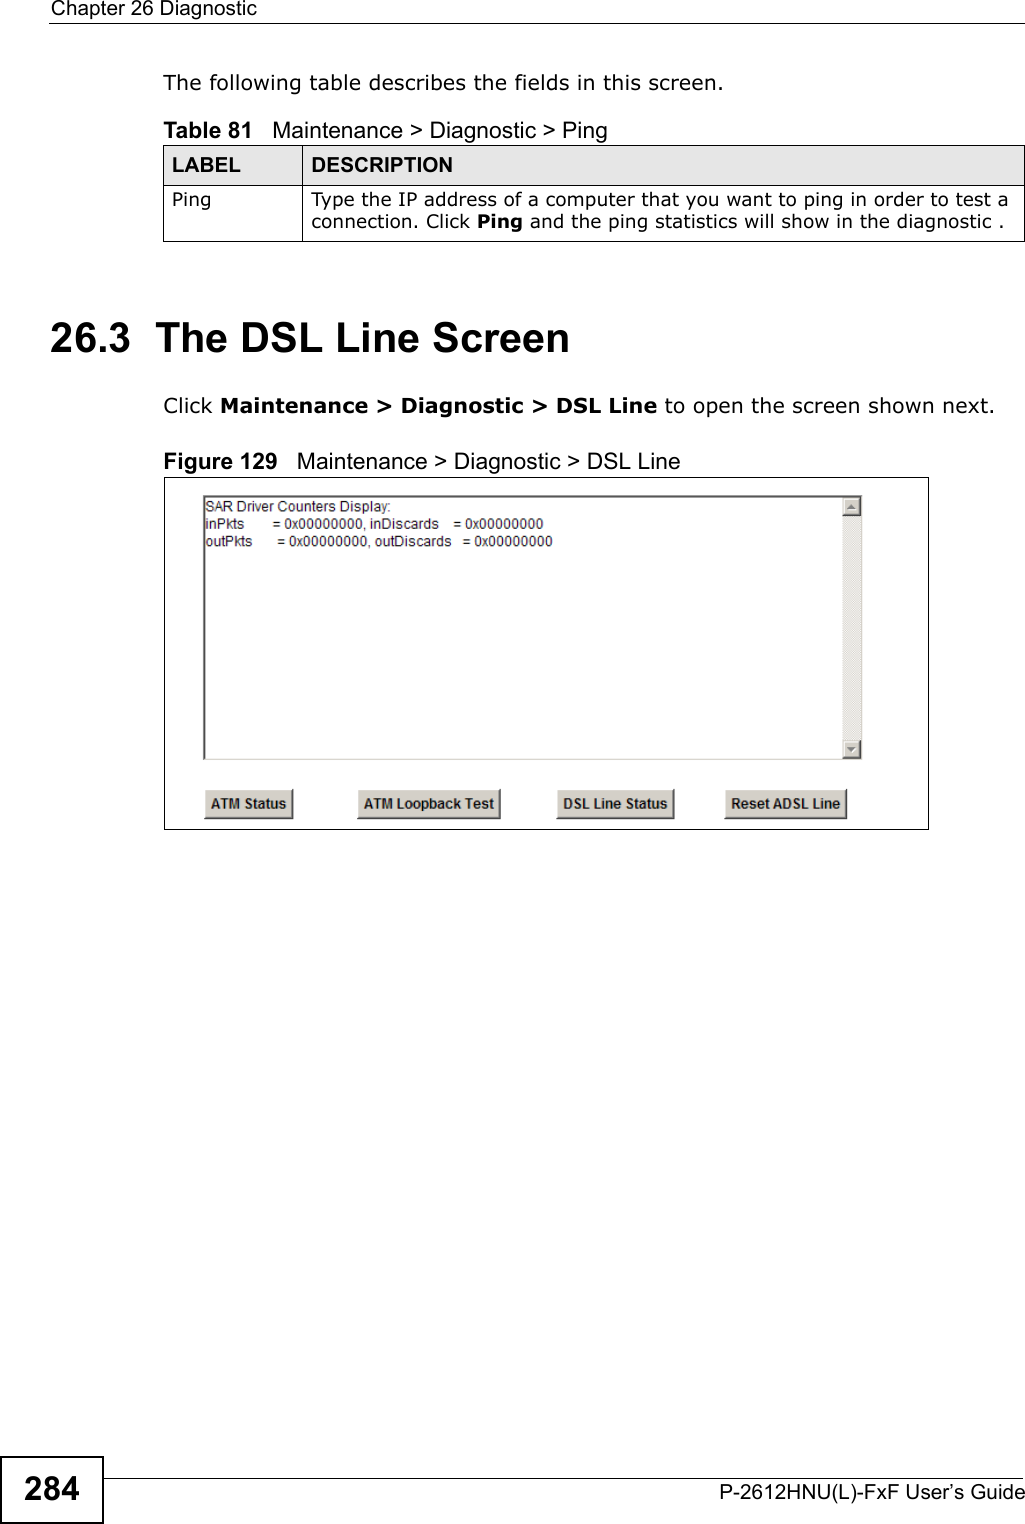 Chapter 26 DiagnosticP-2612HNU(L)-FxF User’s Guide284The following table describes the fields in this screen.26.3  The DSL Line Screen Click Maintenance &gt; Diagnostic &gt; DSL Line to open the screen shown next.Figure 129   Maintenance &gt; Diagnostic &gt; DSL LineTable 81   Maintenance &gt; Diagnostic &gt; PingLABEL DESCRIPTIONPing Type the IP address of a computer that you want to ping in order to test a connection. Click Ping and the ping statistics will show in the diagnostic .